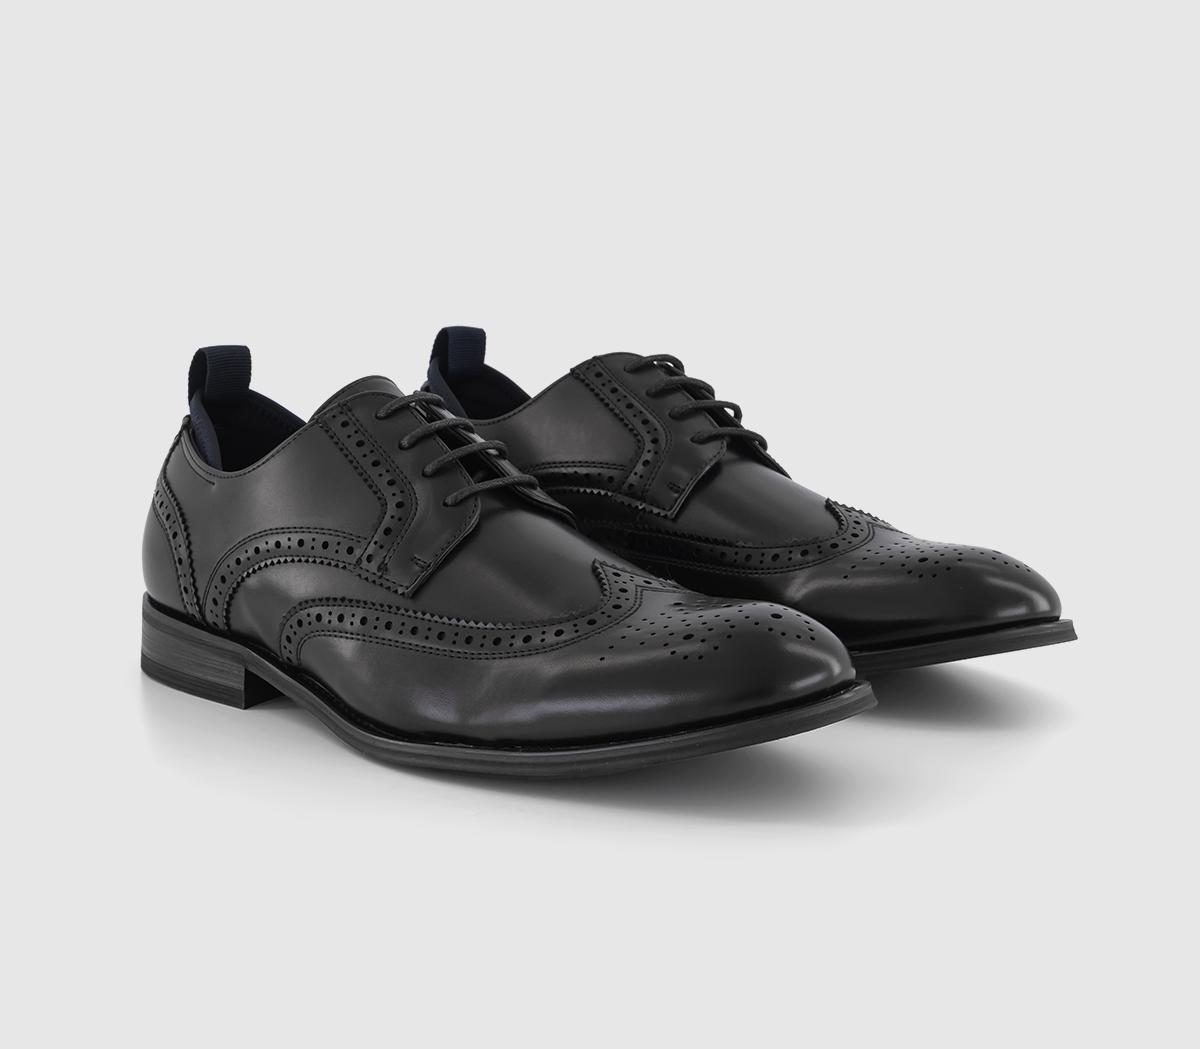 OFFICE Mens Montgomery Brogue Derby Shoes Black, 8